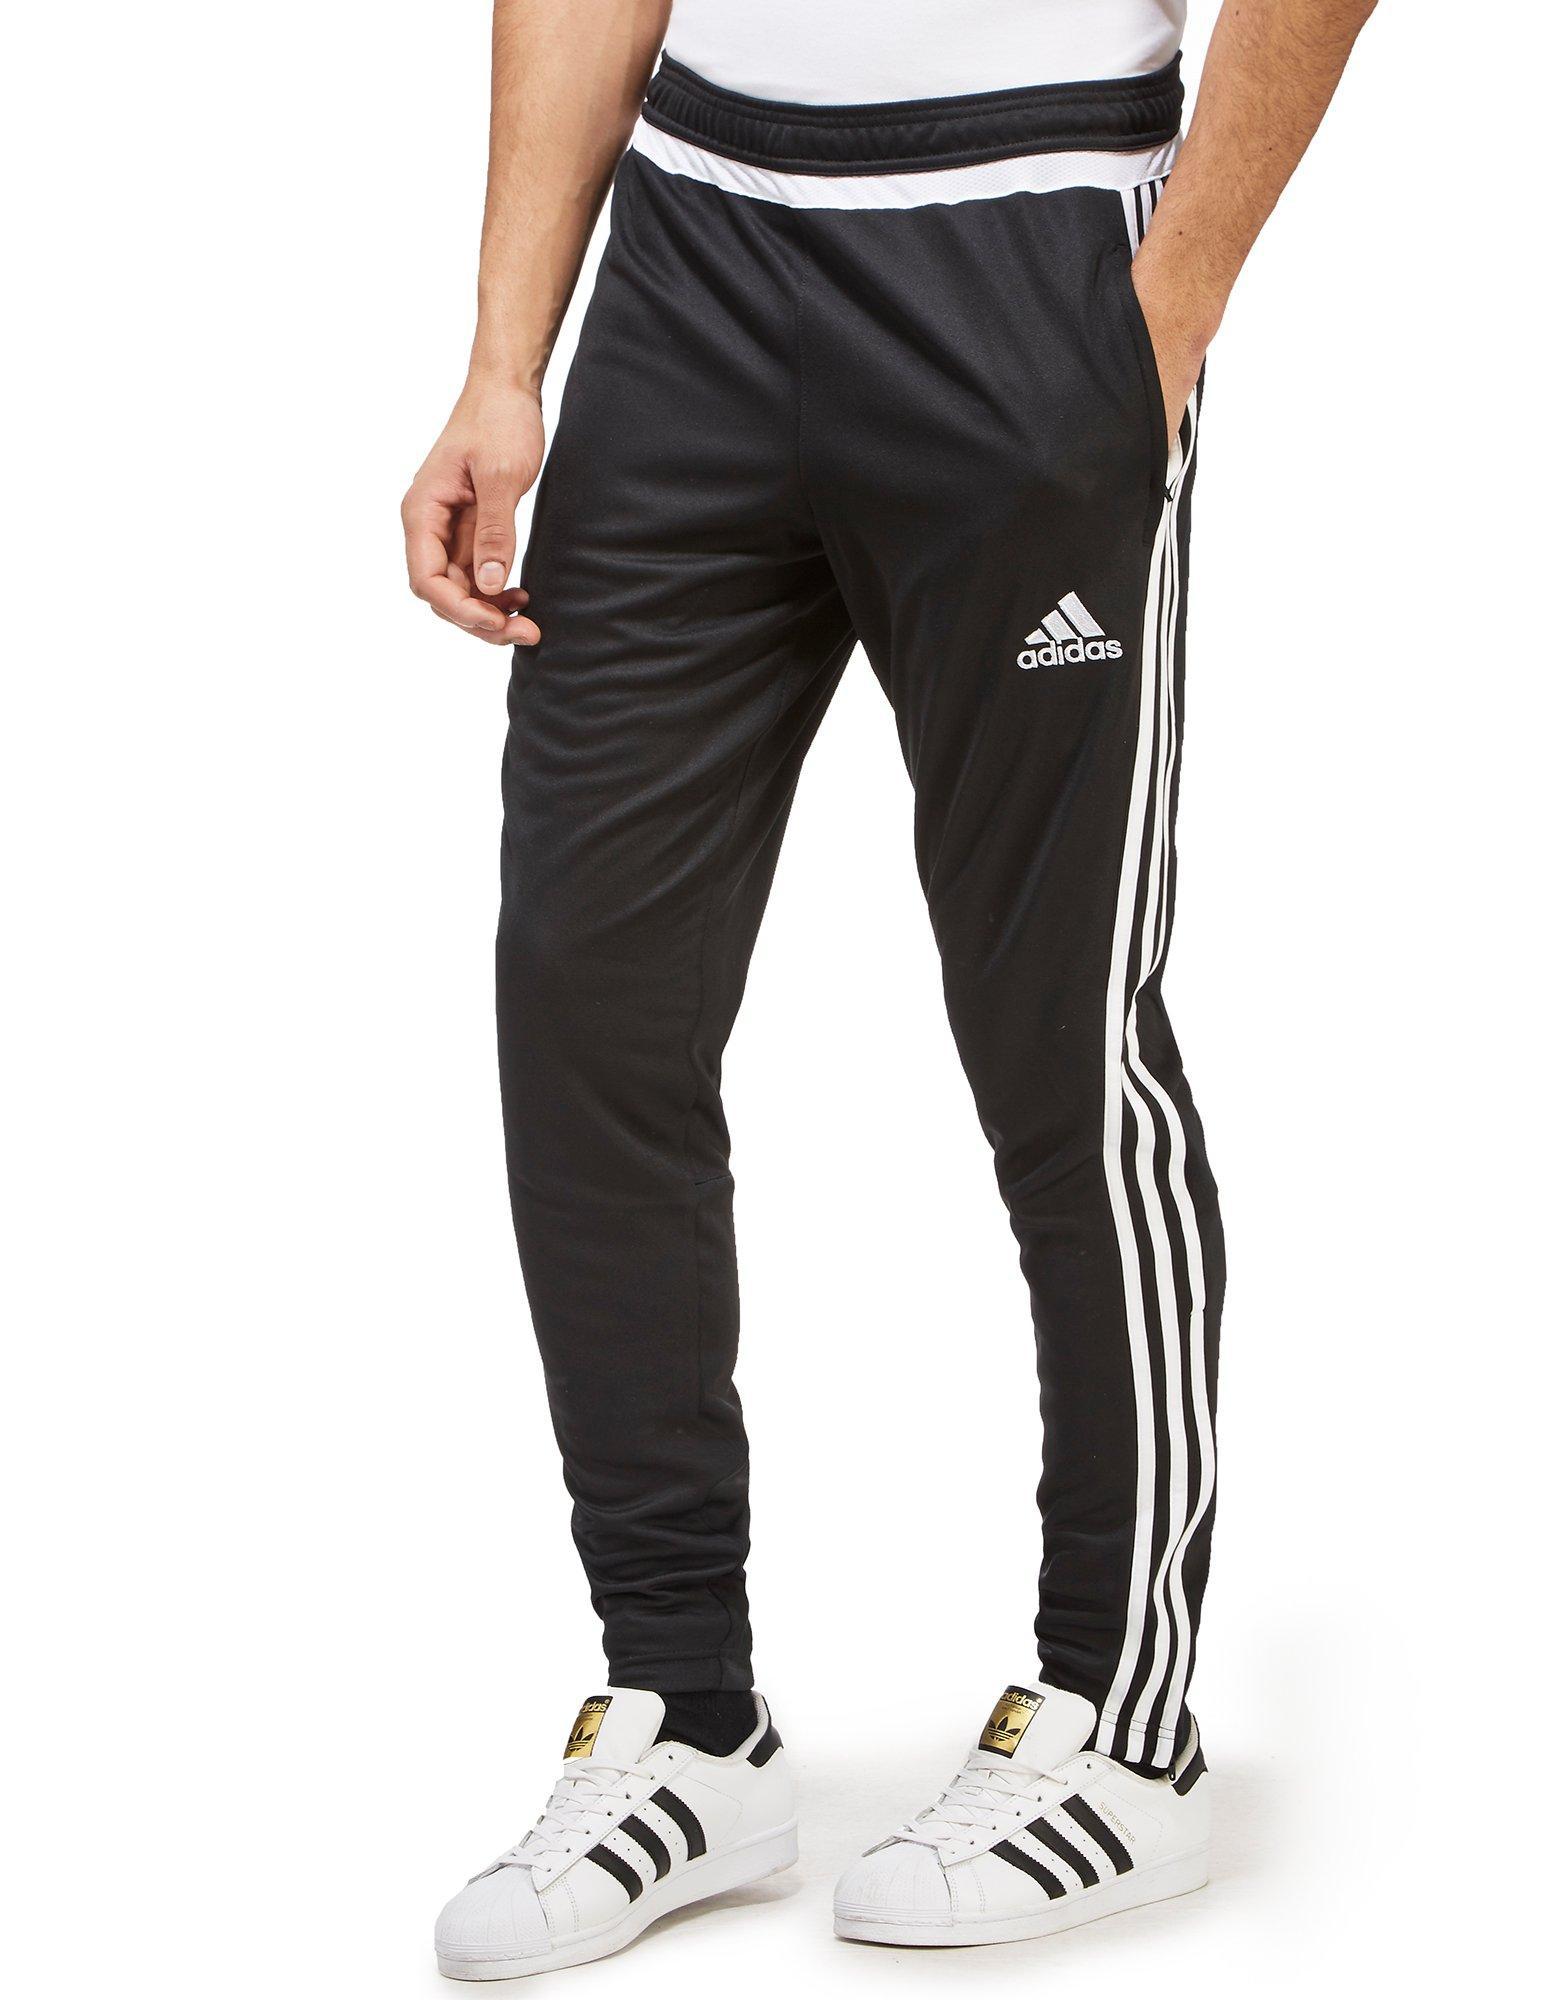 adidas Synthetic Tiro 15 Poly Training Pants in Black/White (Black) for ...